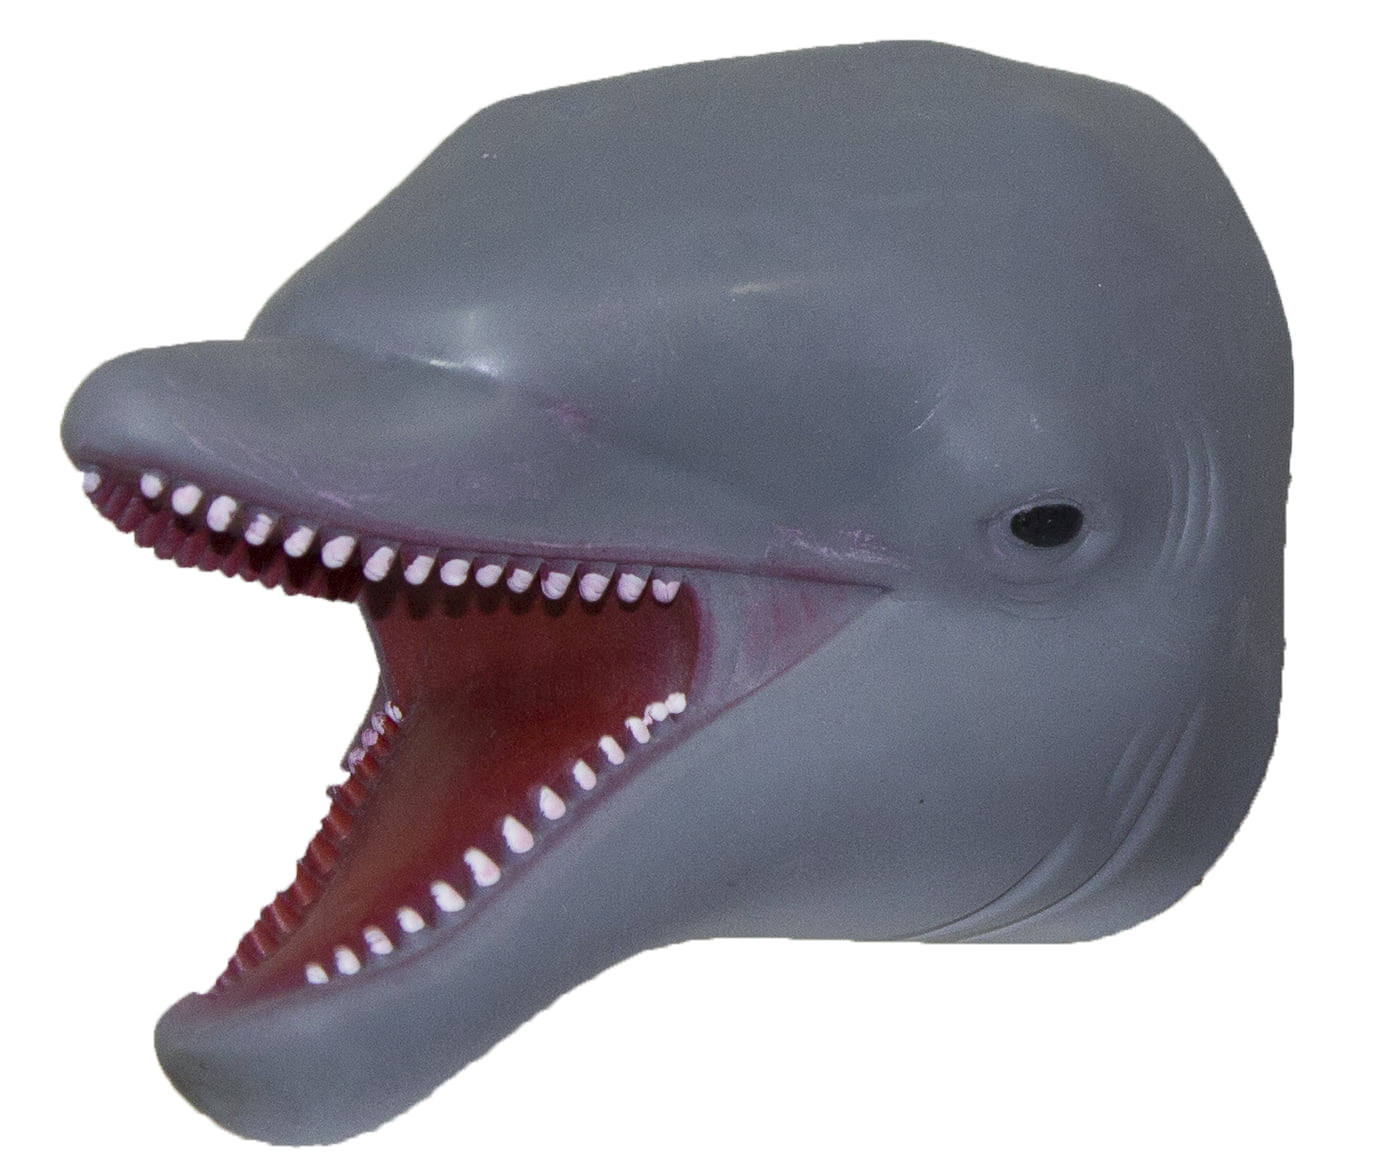 Barry-Owen Co Dolphin Hand Puppet Soft Realistic Rubber Toy 